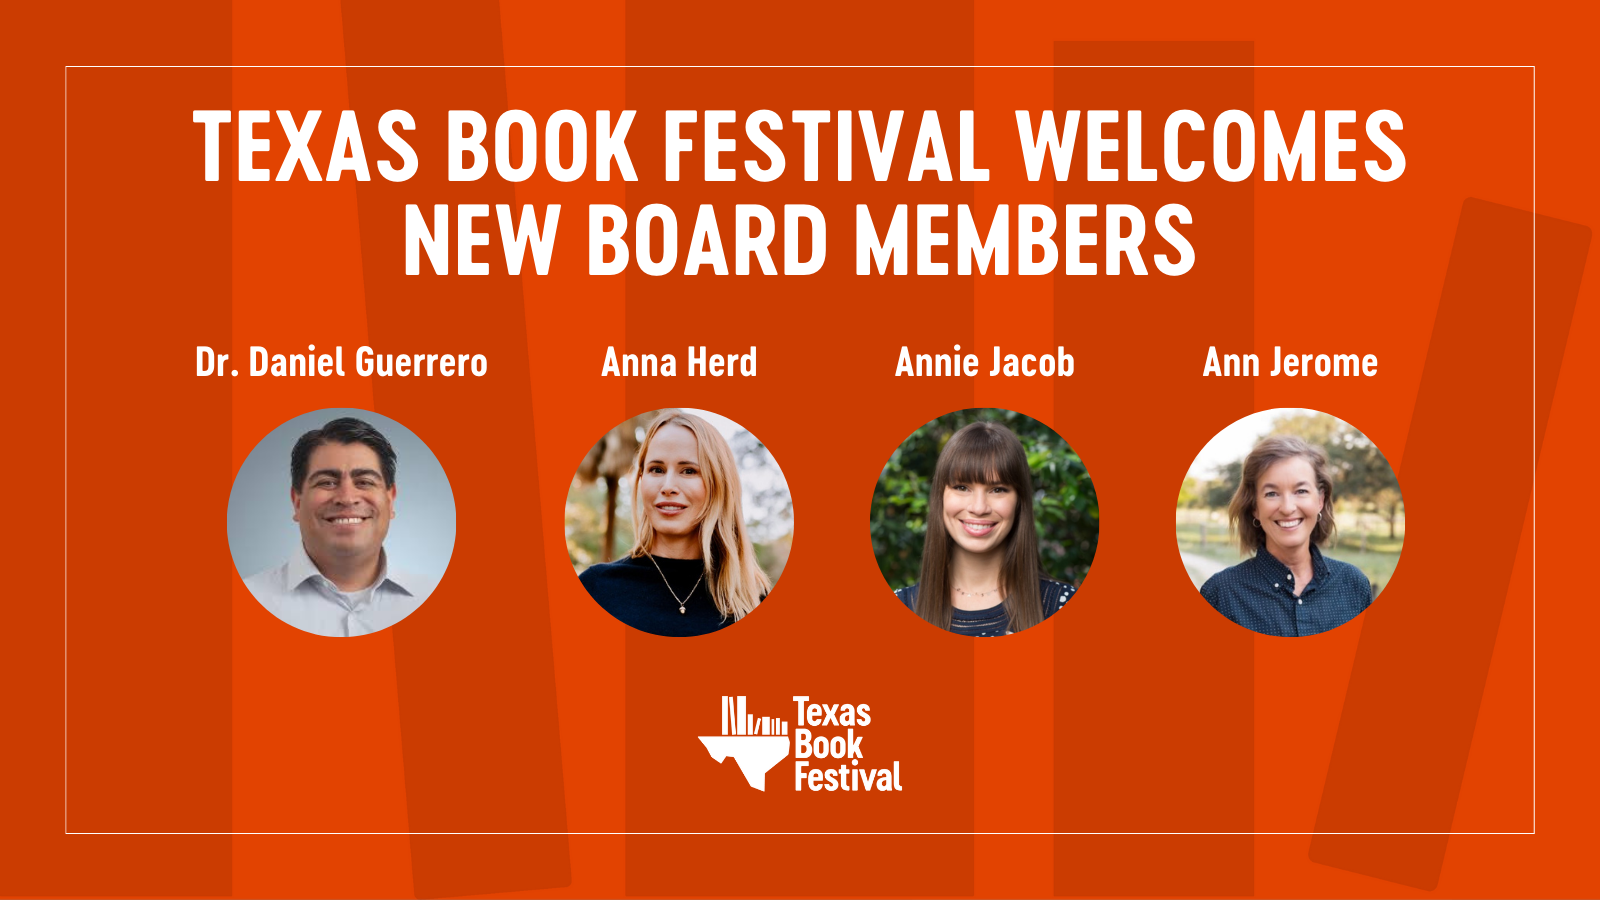 Texas Book Festival Welcomes Four New Board Members